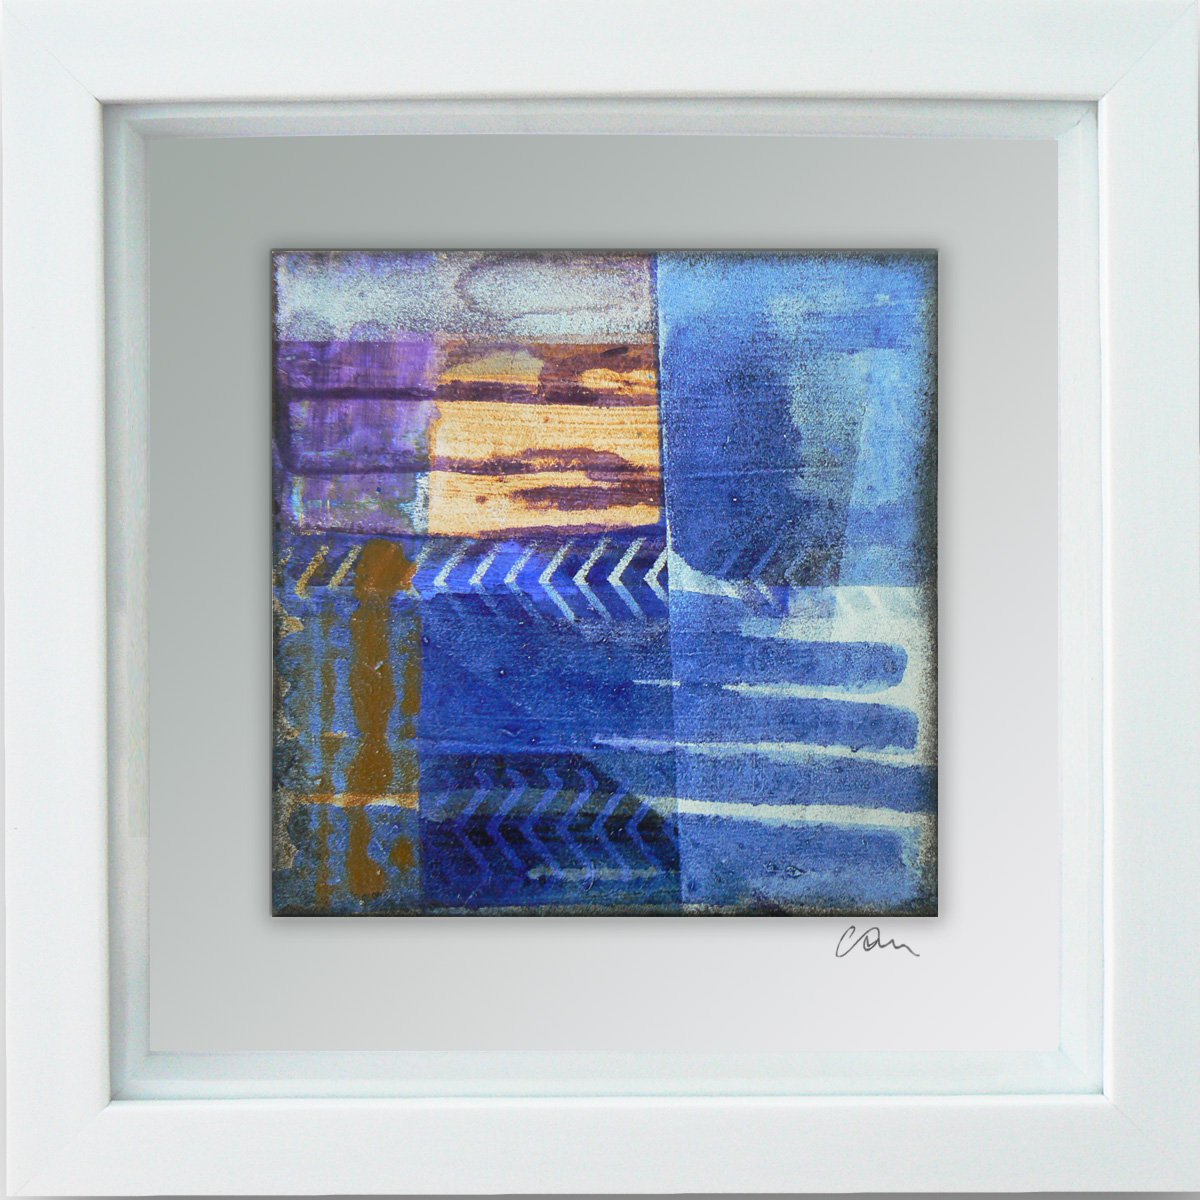 Framed ready to hang original abstract - Cahier #4 by Carolynne Coulson